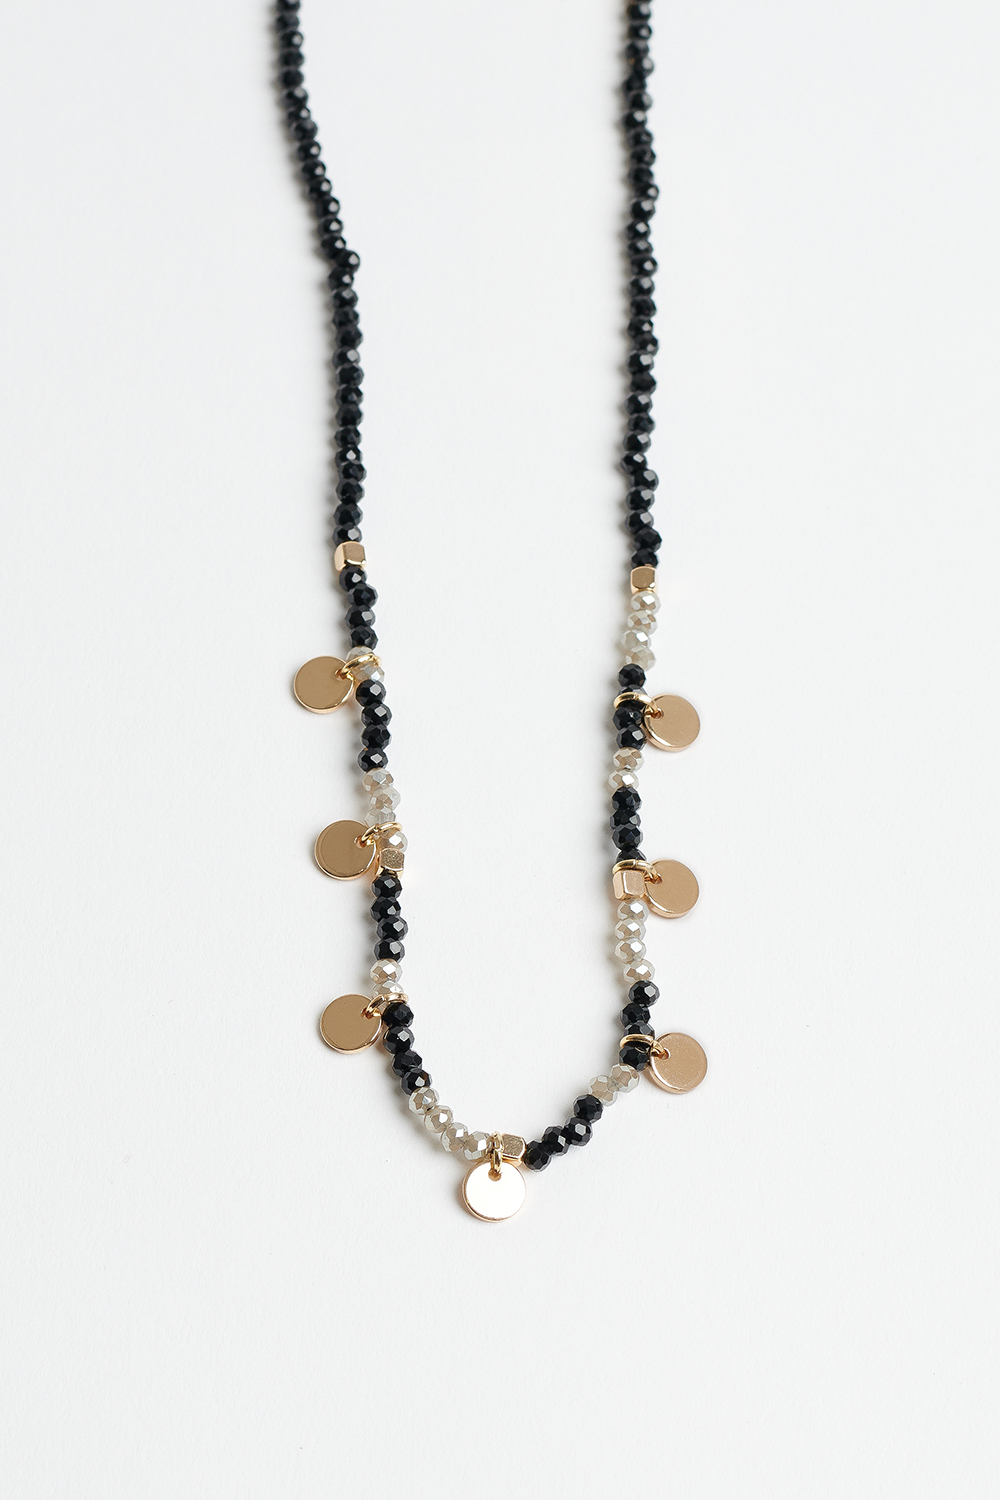 Black Onyx and Gold Bead Necklace 14k Gold - Ruby Lane